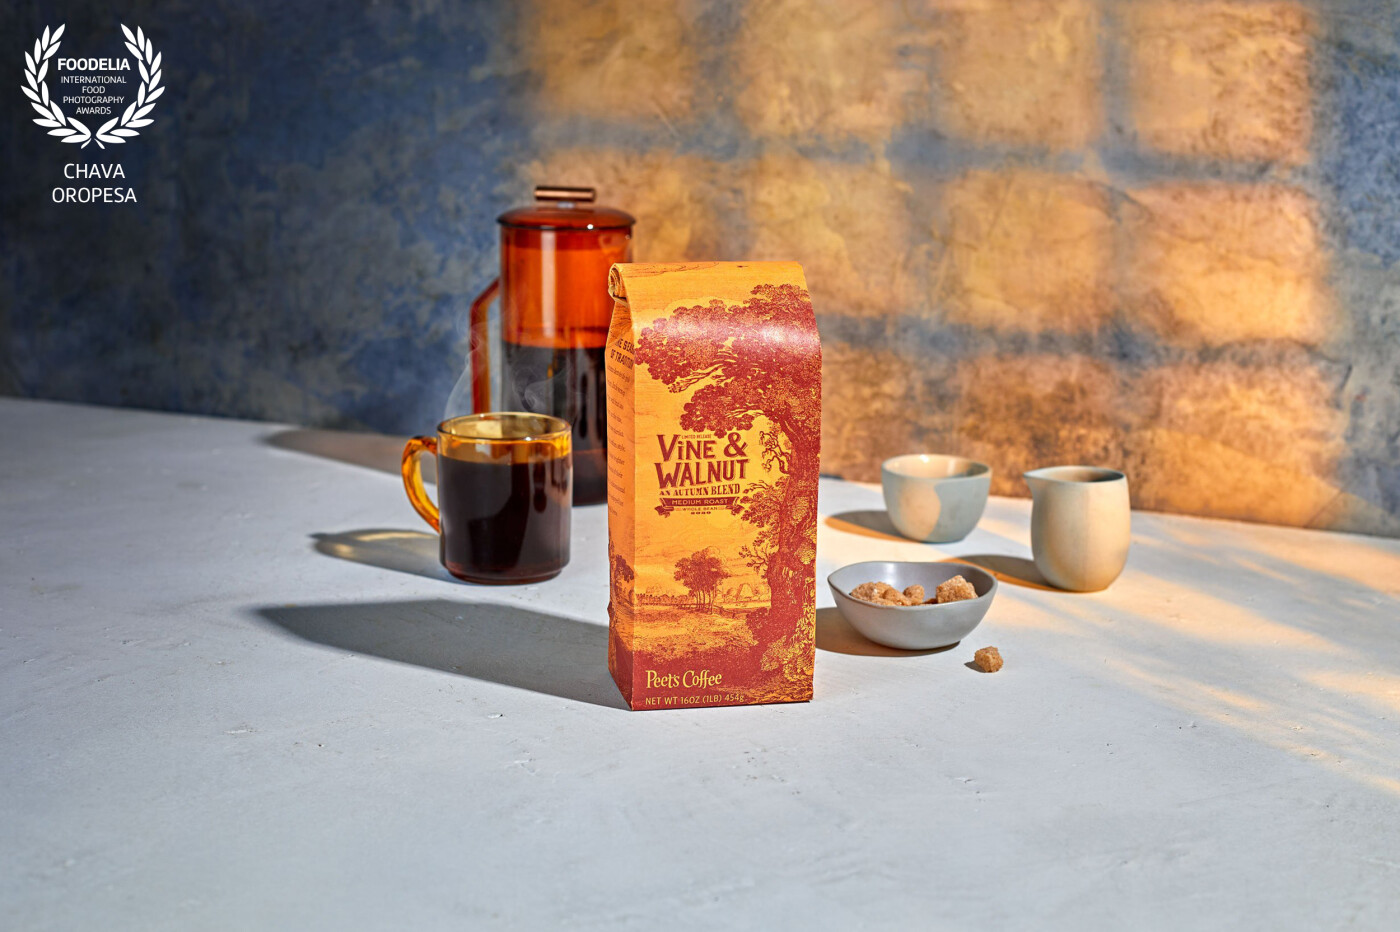 Client work for Peet's Coffee seasonal coffee.<br />
The Vine & Walnut's packaging has a great orange hue, so I thought framing it with blue and warm orange highlights would be a good solution to help the bag stand out.<br />
Food styling: Lorena Masso